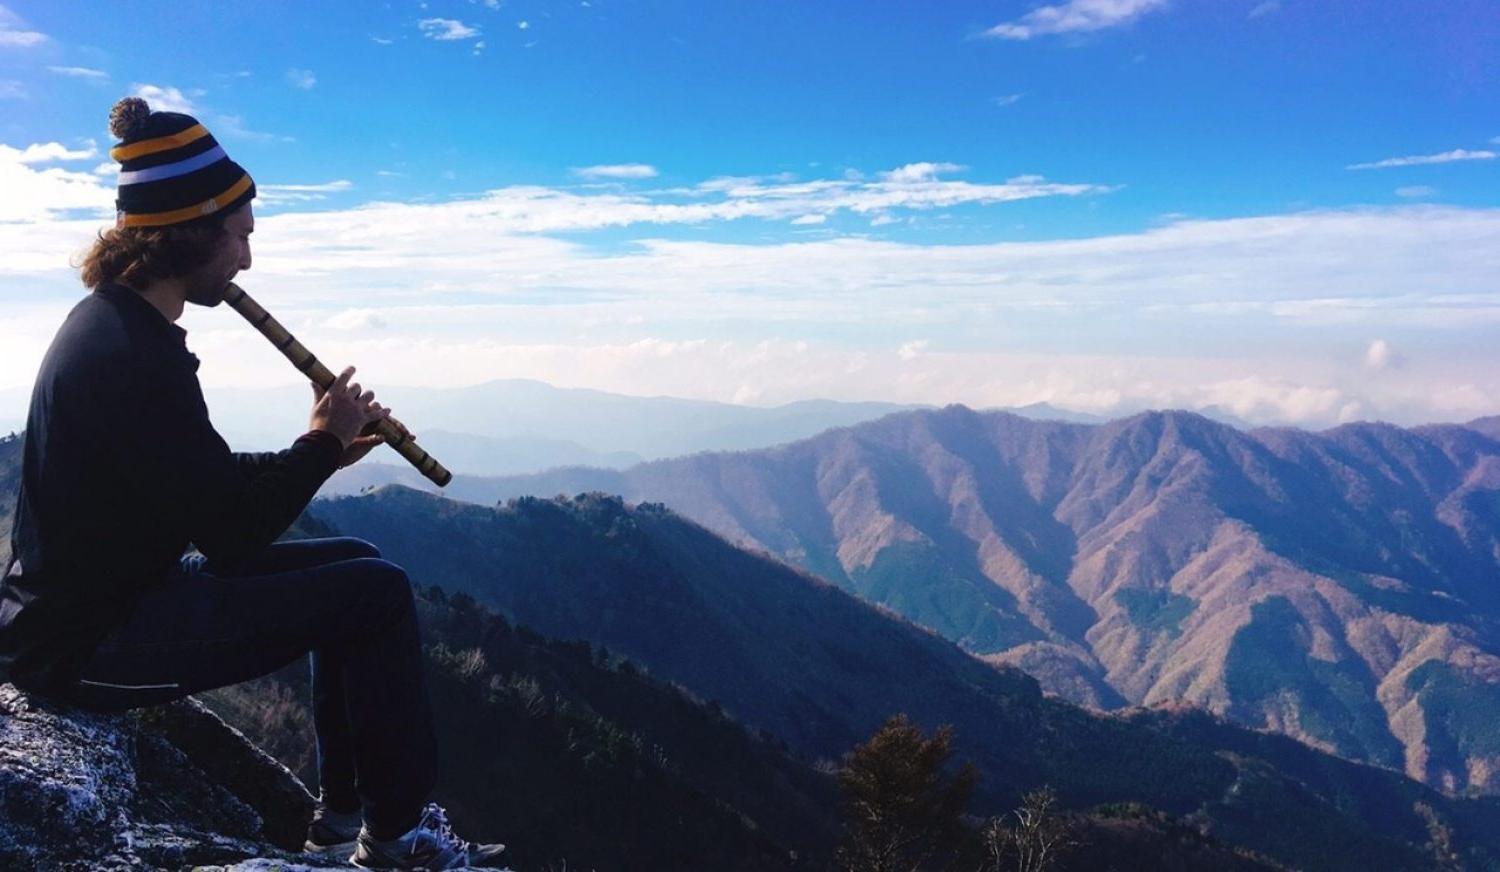 A person playing an instrument on top of a mountain